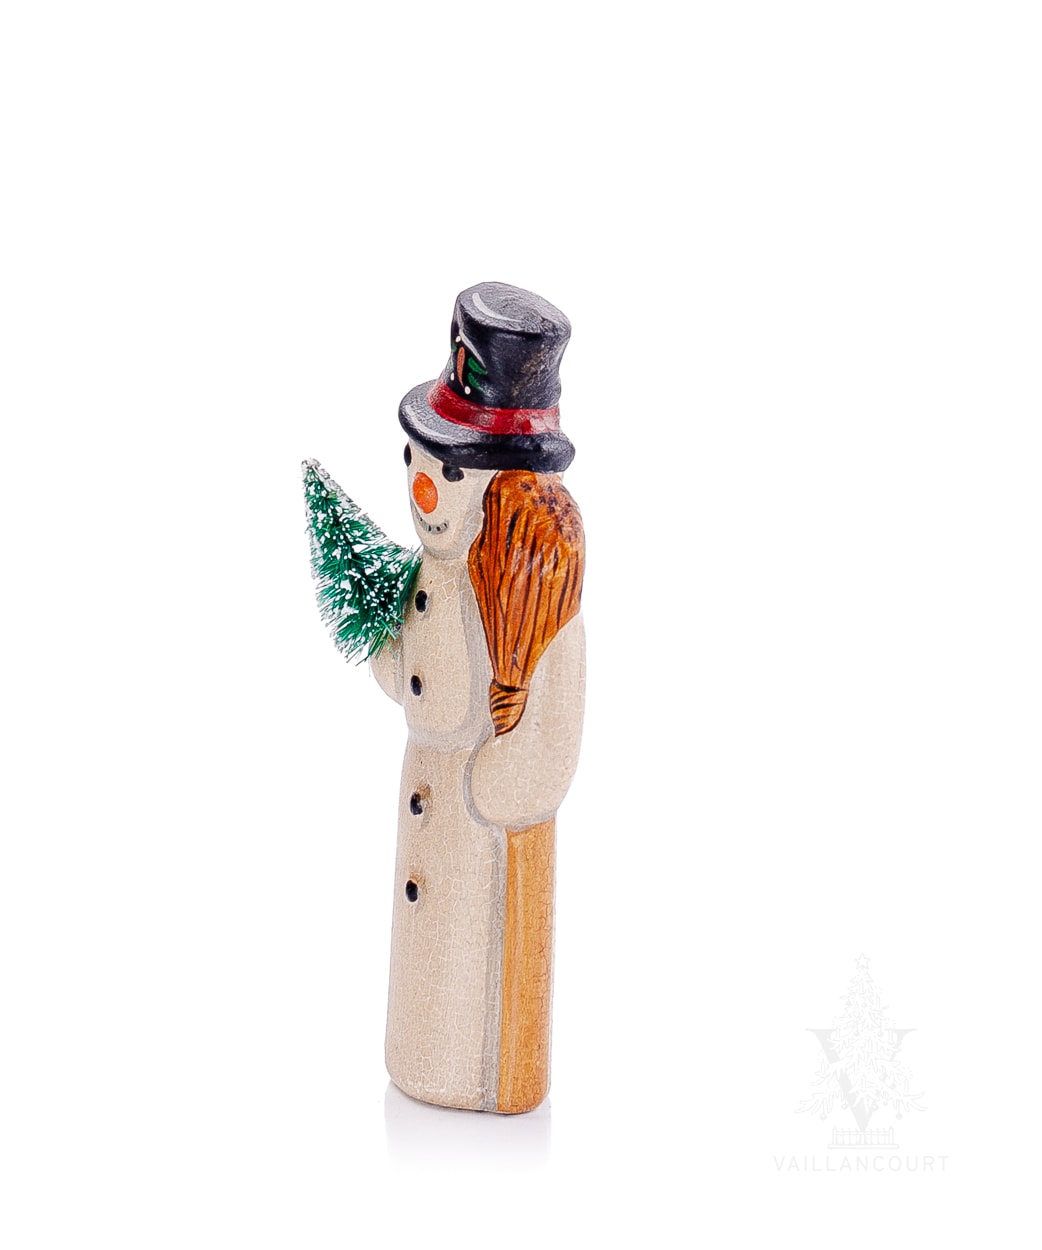 Snowman with Tree and Broom from Vaillancourt